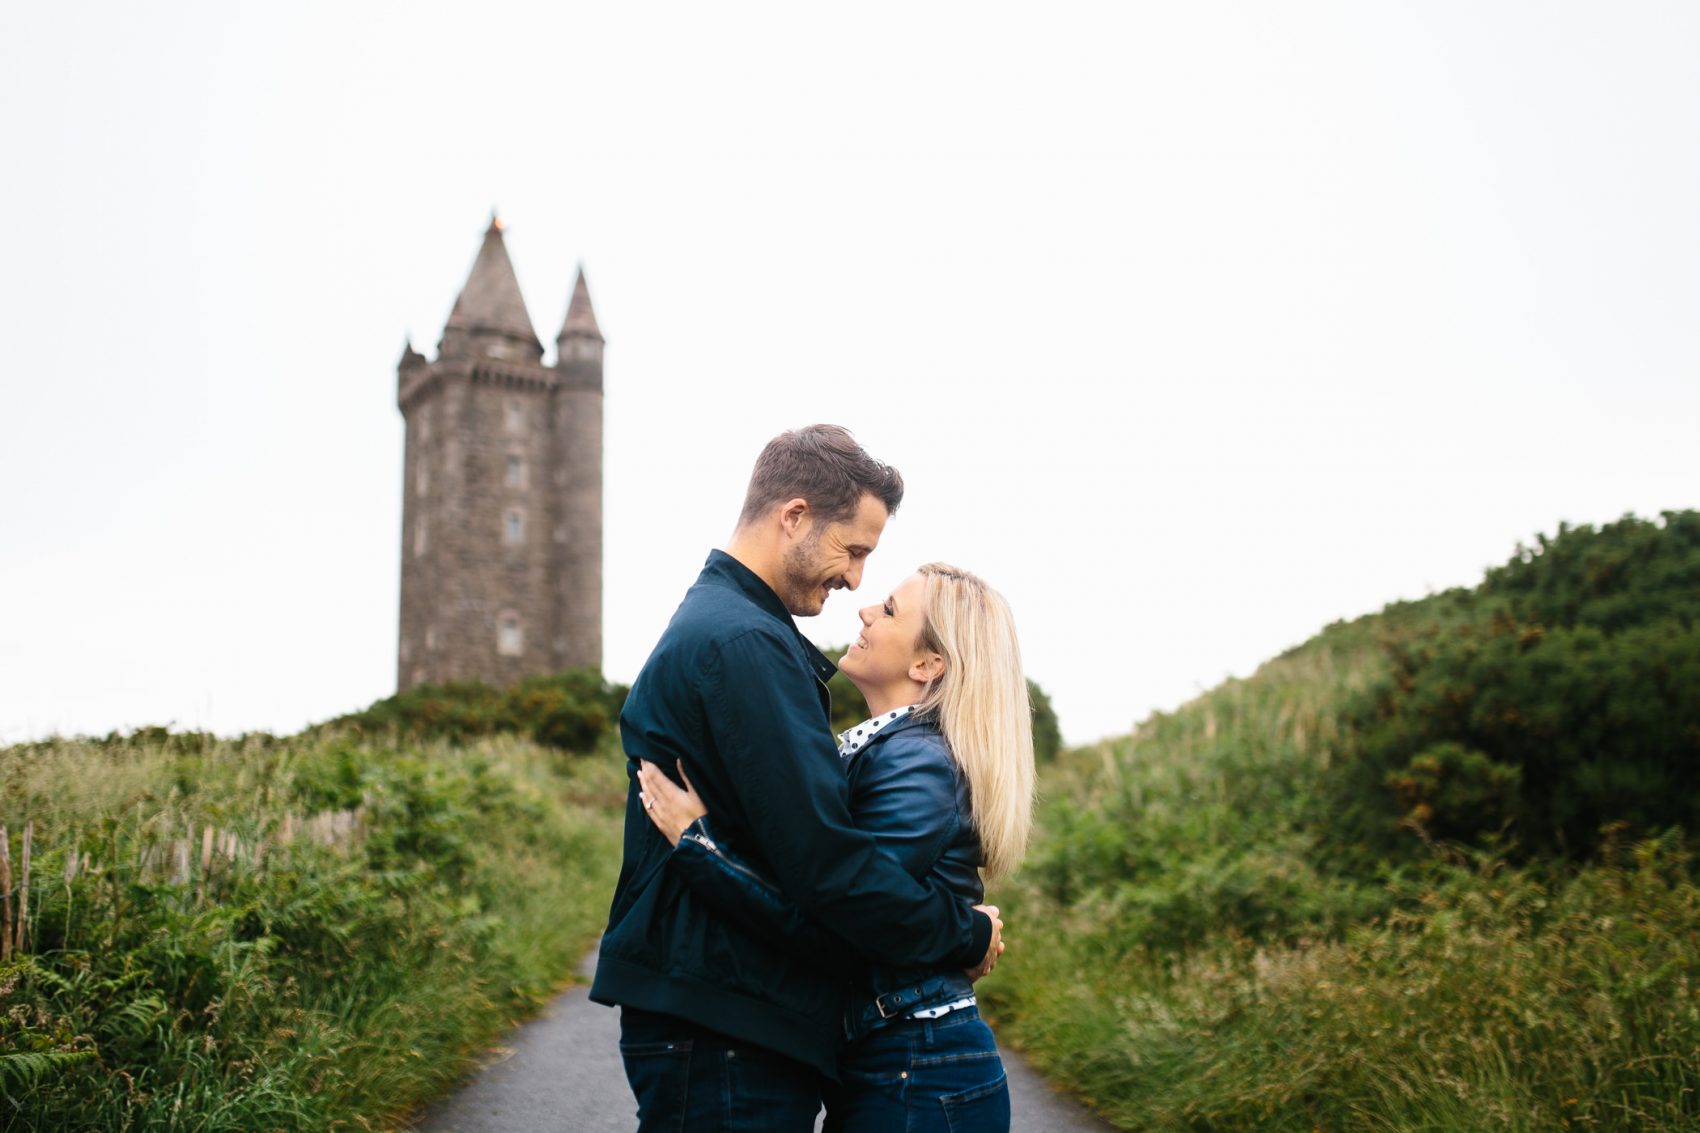 becky-taylor-1-1700x1133 Becky & Taylor Engagement // Scrabo Tower